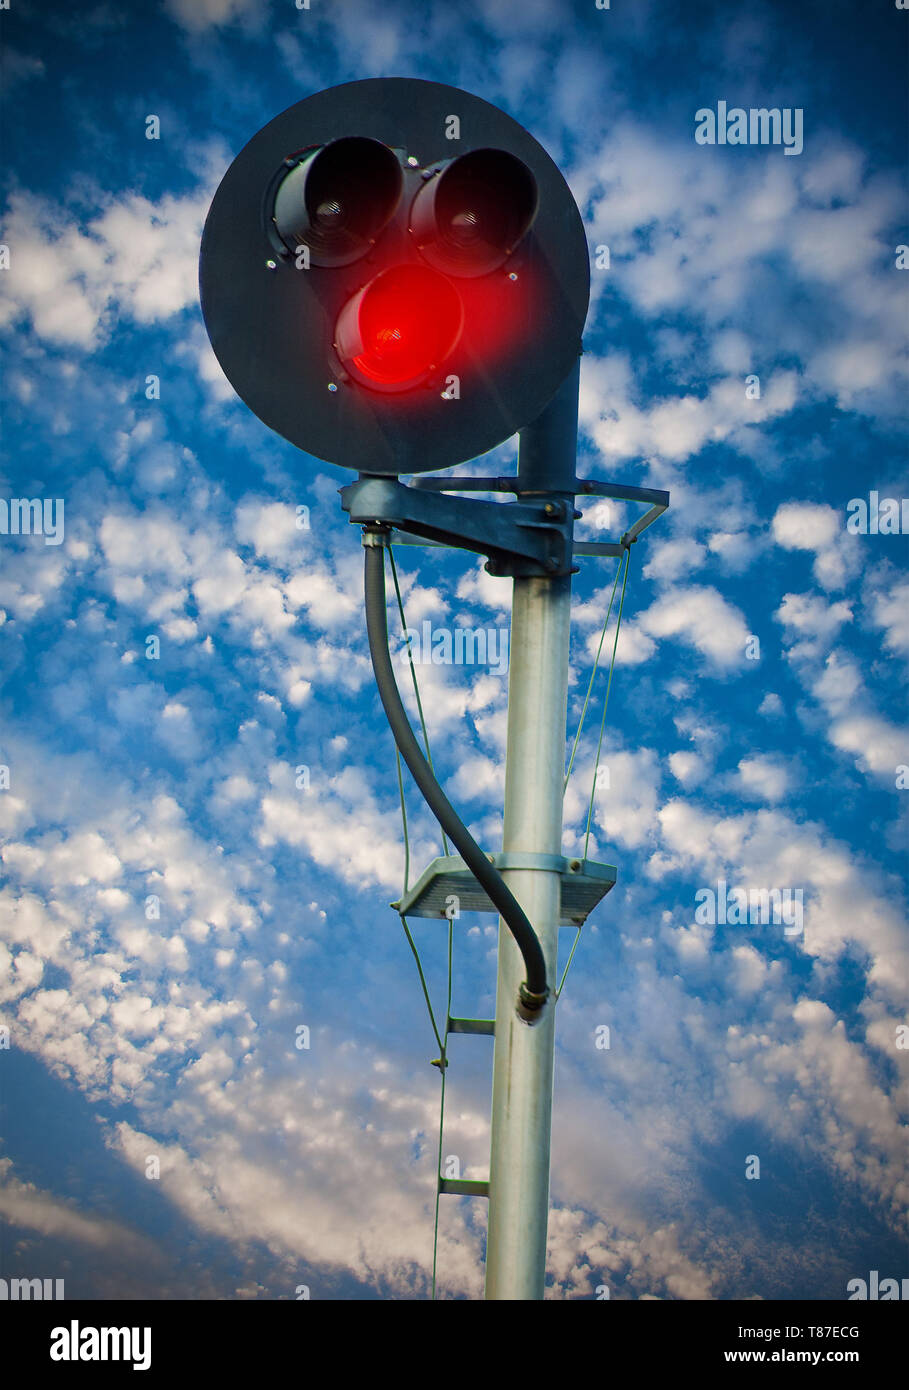 Flashing lights of track and road signals Stock Photo